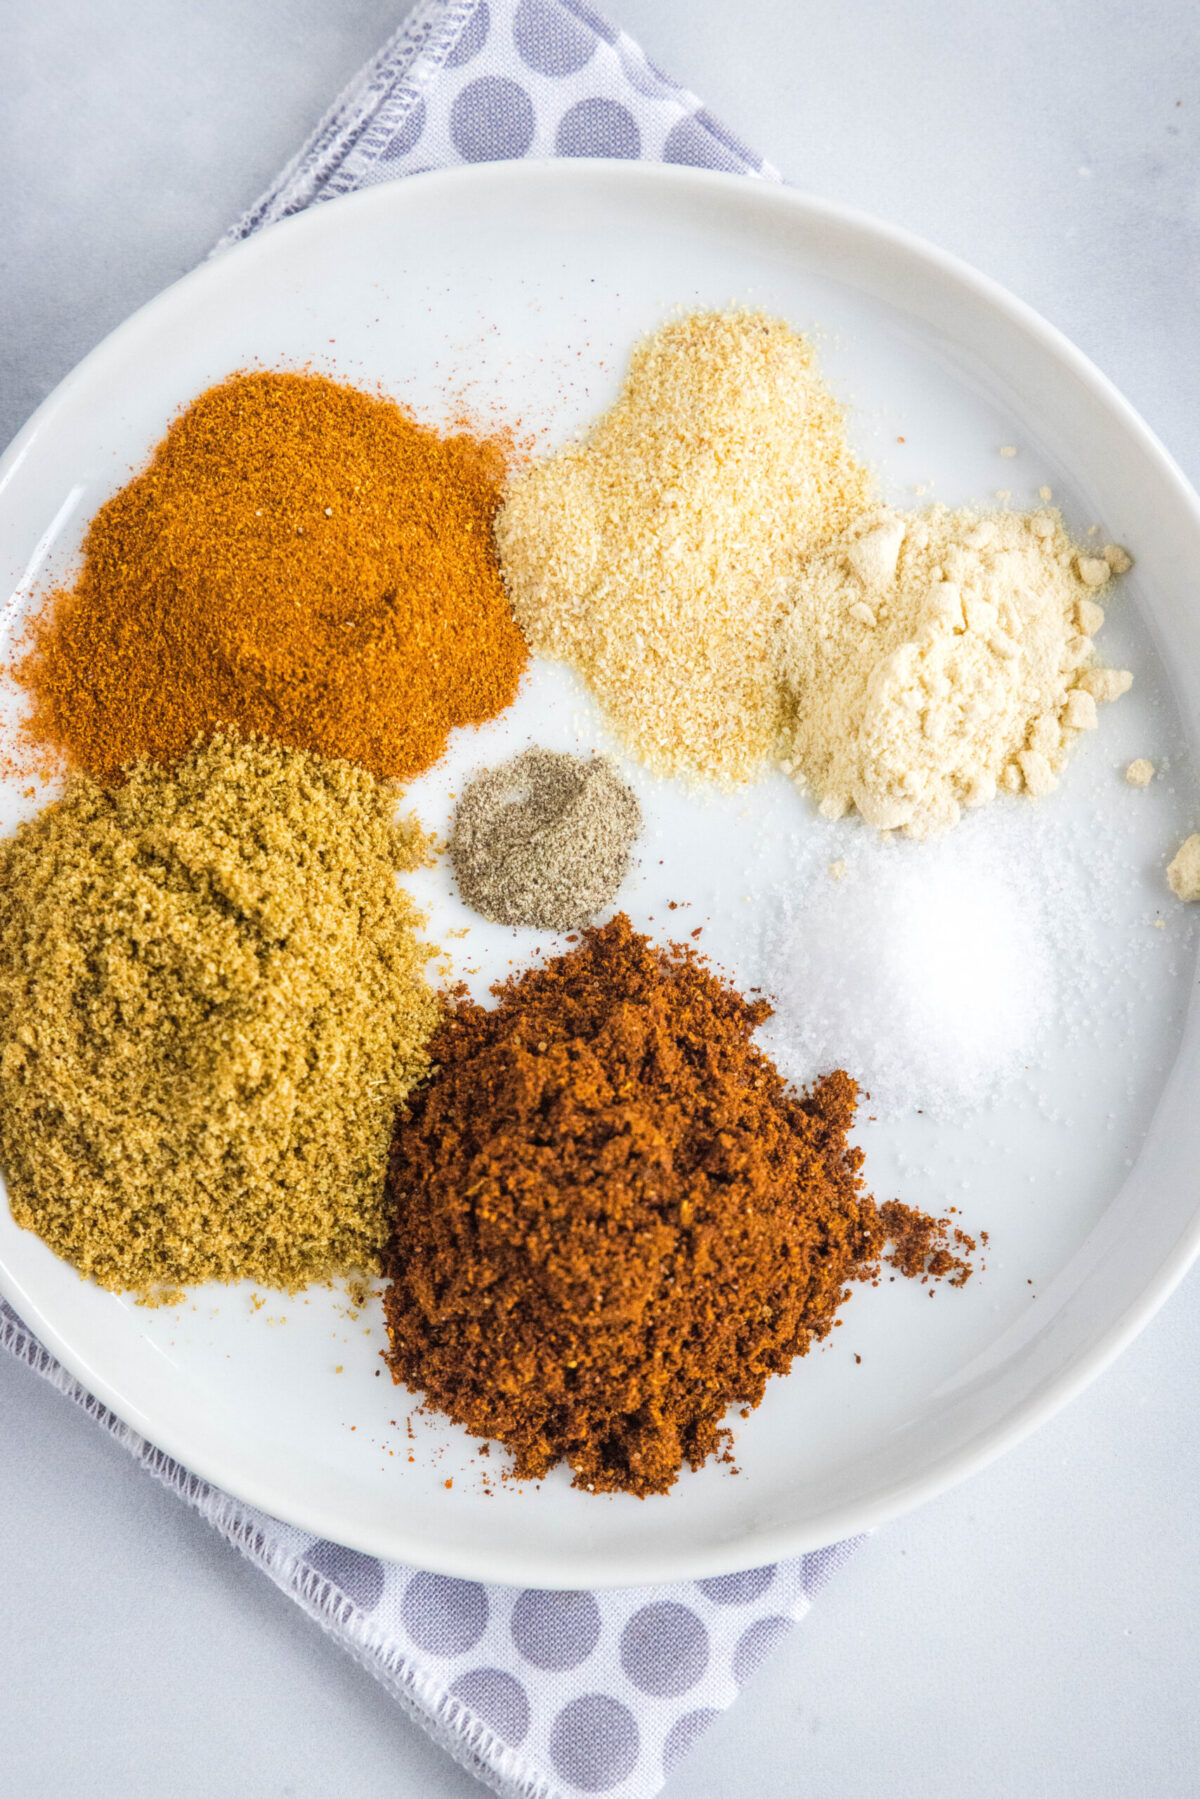 Overhead view of a white circular plate with piles of chili powder, ground cumin, paprika, garlic powder, onion powder, salt, and pepper.